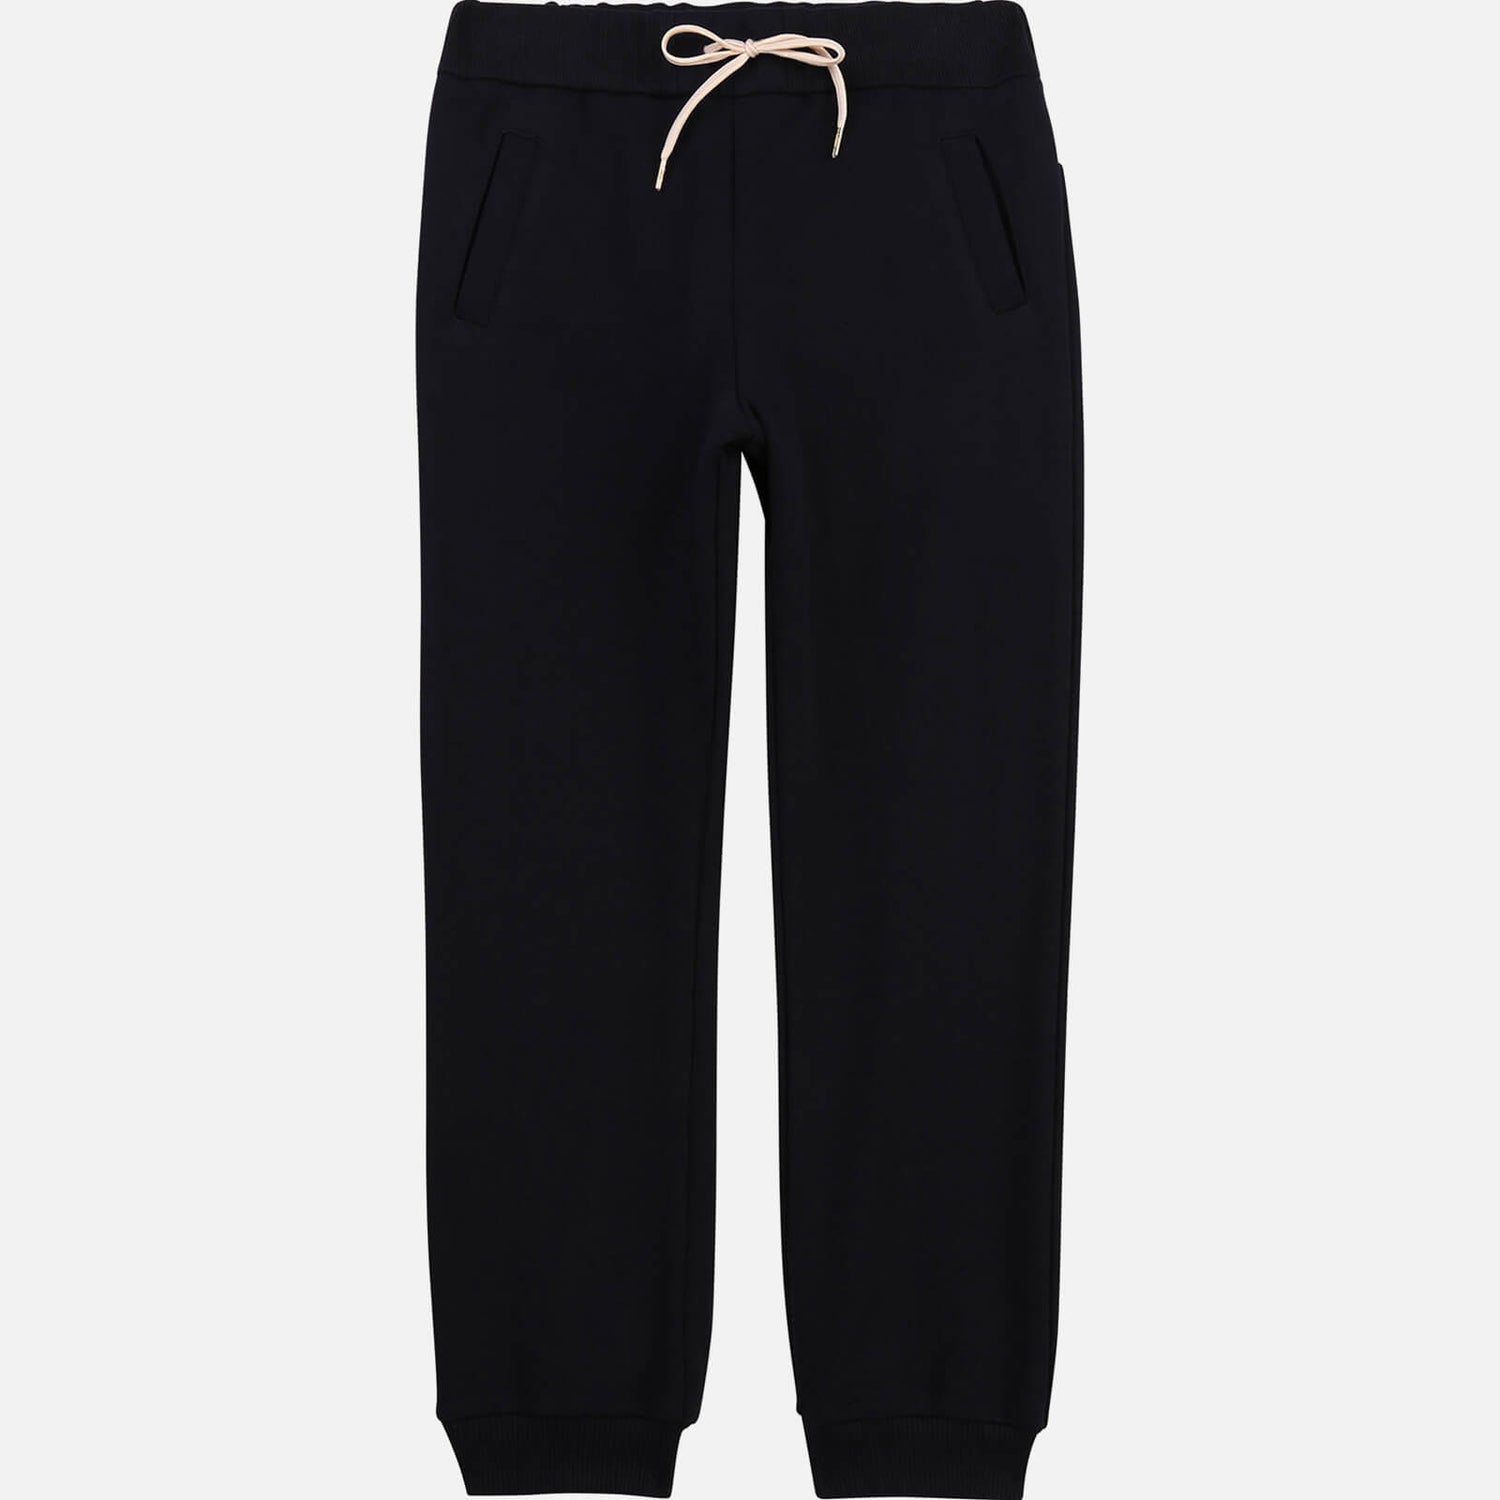 Chloé Girls' Sweatpant Trousers - Navy - 6 Years